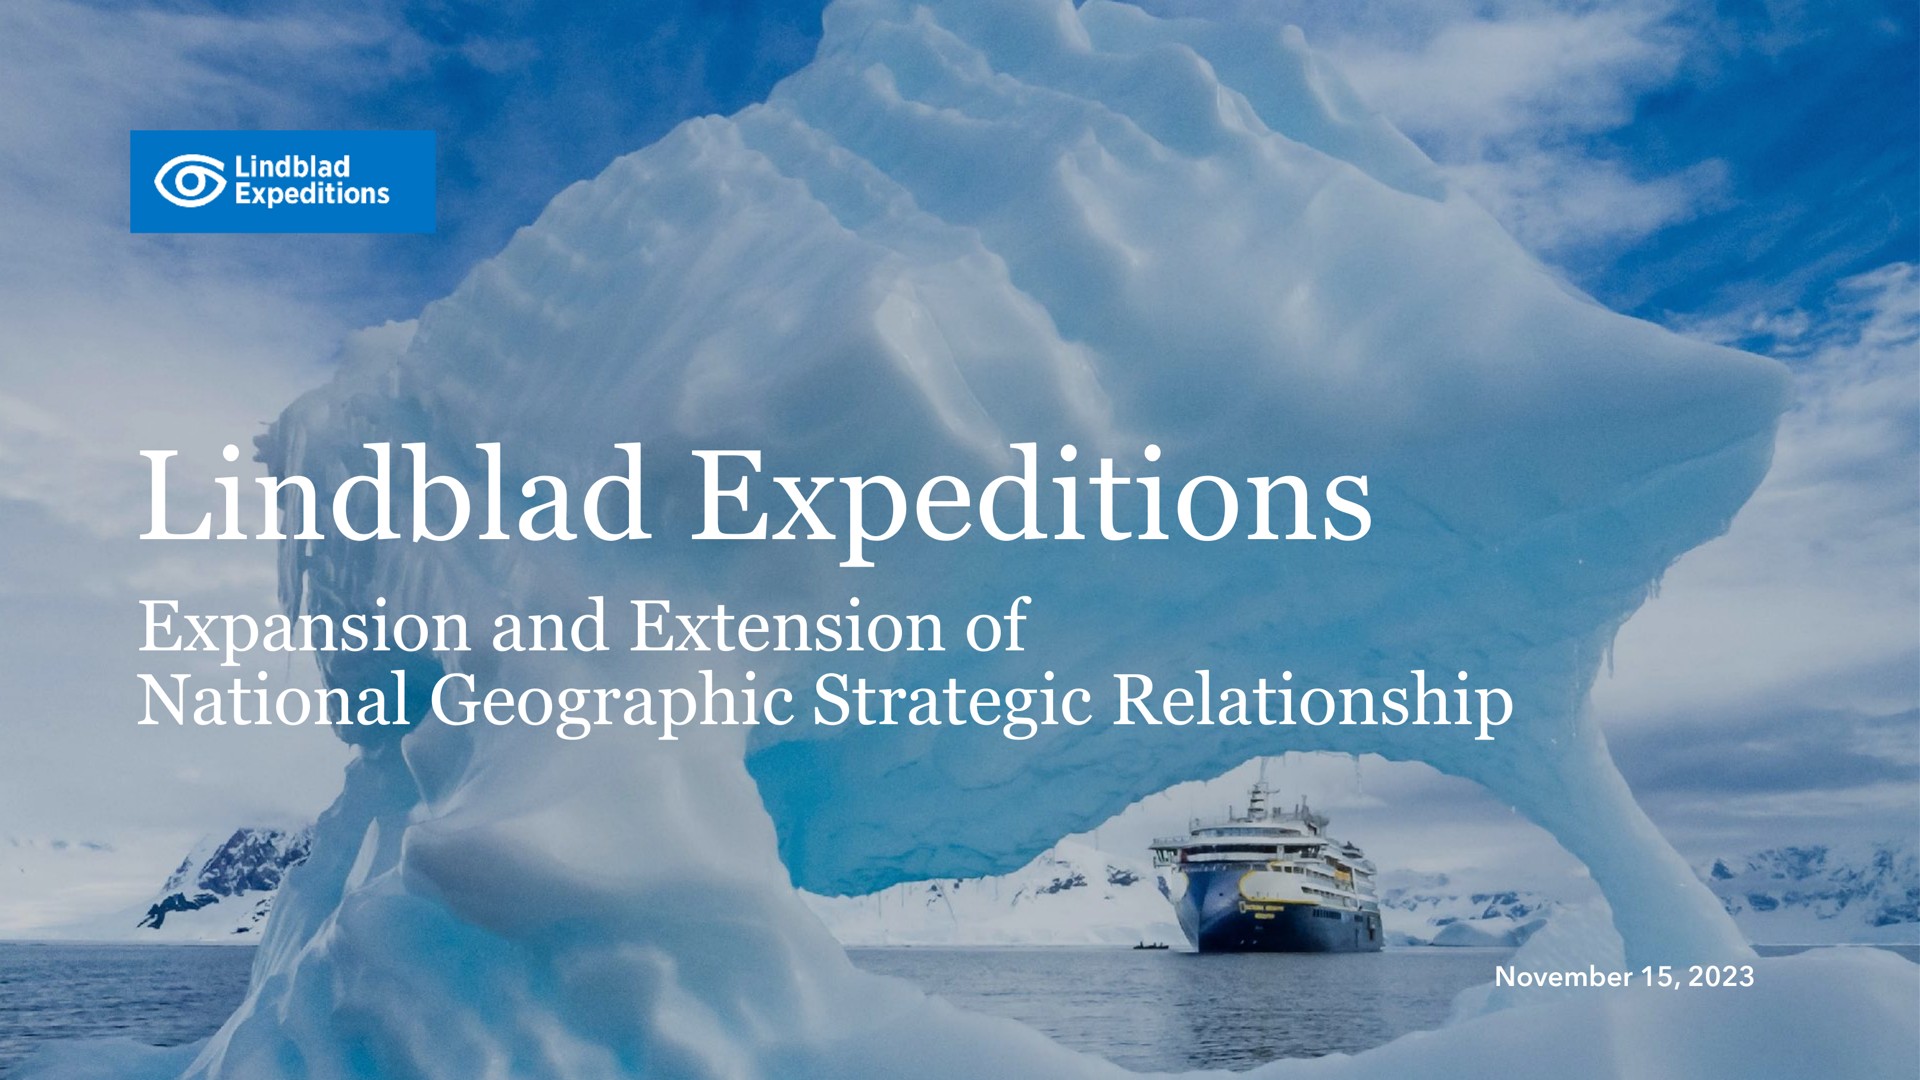 expeditions expansion and extension of national geographic strategic relationship | Lindblad